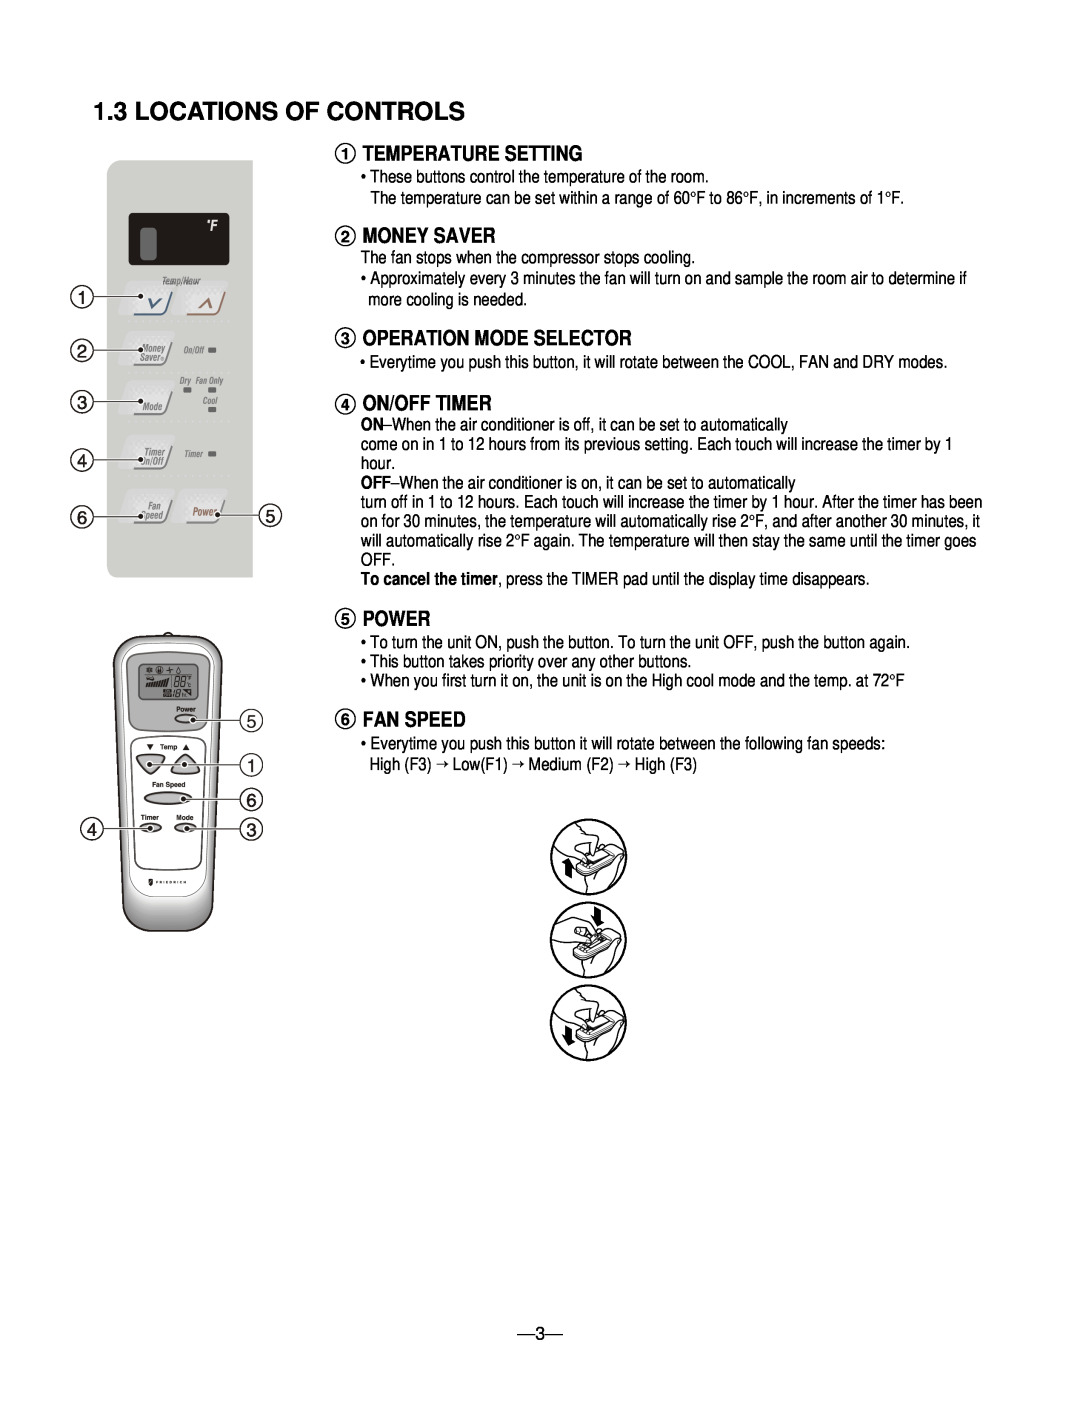 Friedrich CP05N10A 1.3LOCATIONS OF CONTROLS, 1TEMPERATURE SETTING, 2MONEY SAVER, Operation Mode Selector, 4 ON/OFF TIMER 